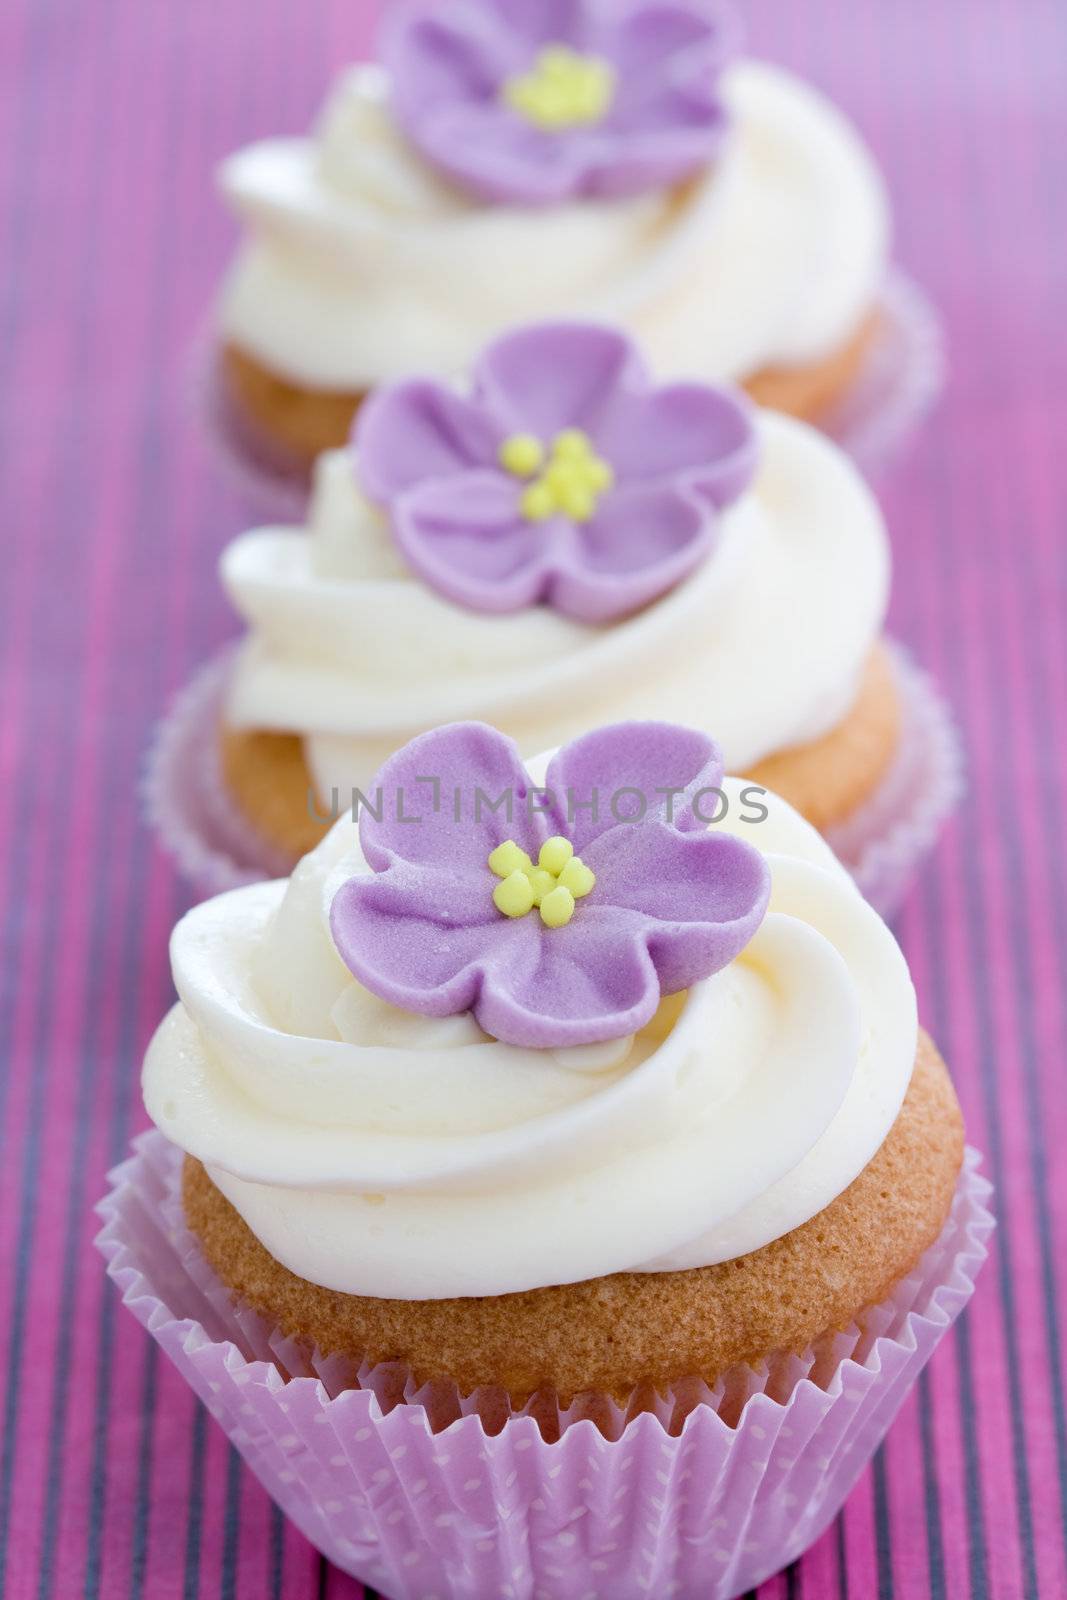 Row of cupcakes decorated with purple sugar flowers